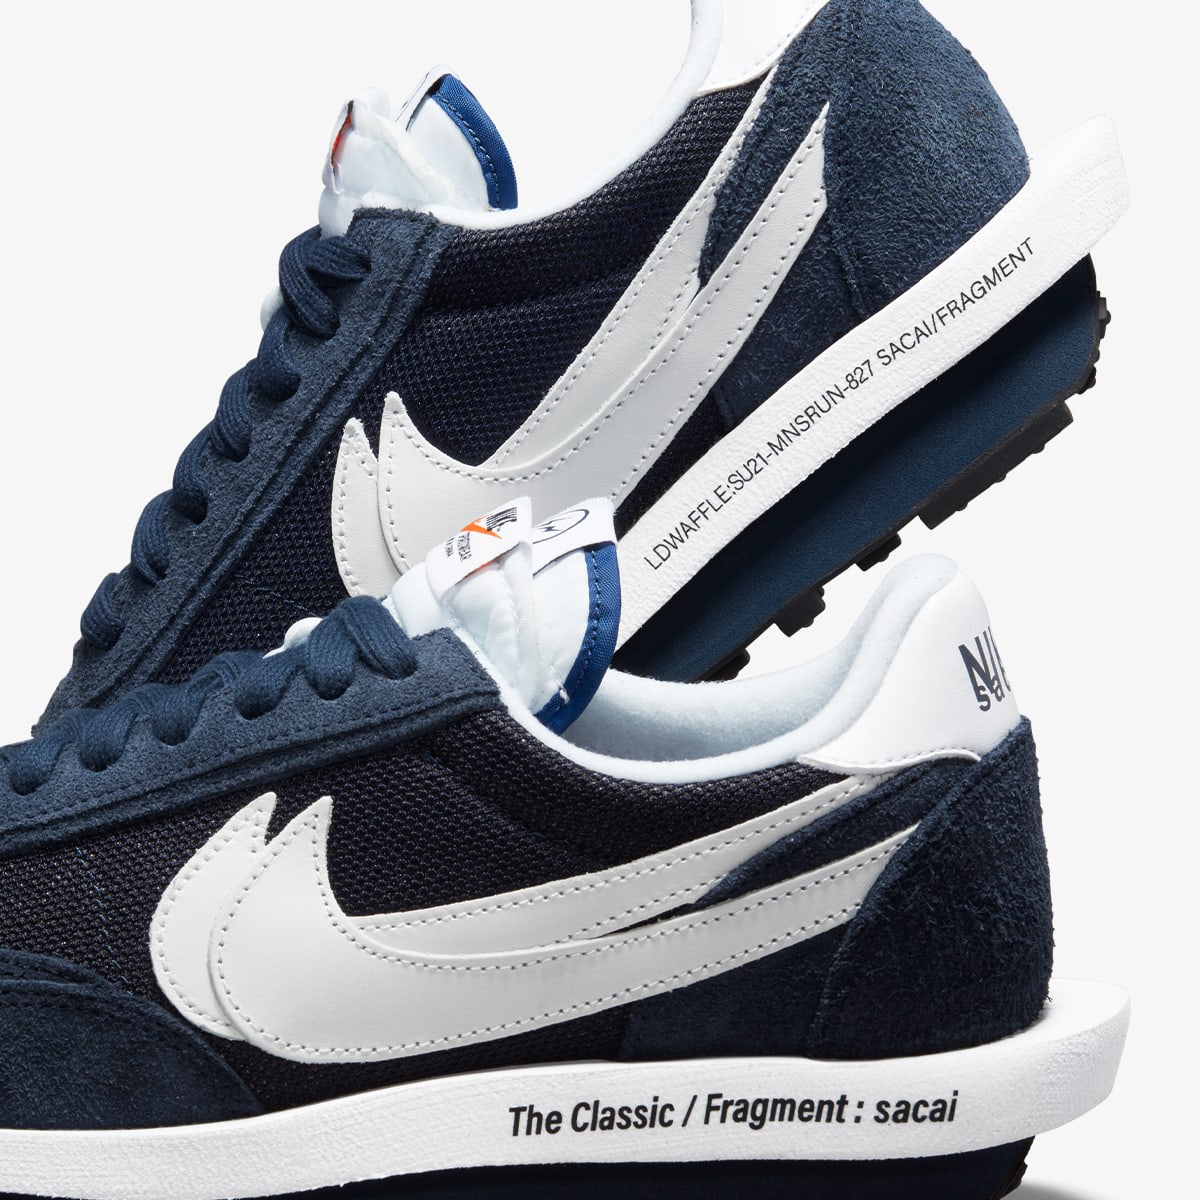 Nike x Sacai x Fragment LDWaffle (Blue Void & White) | END. Launches